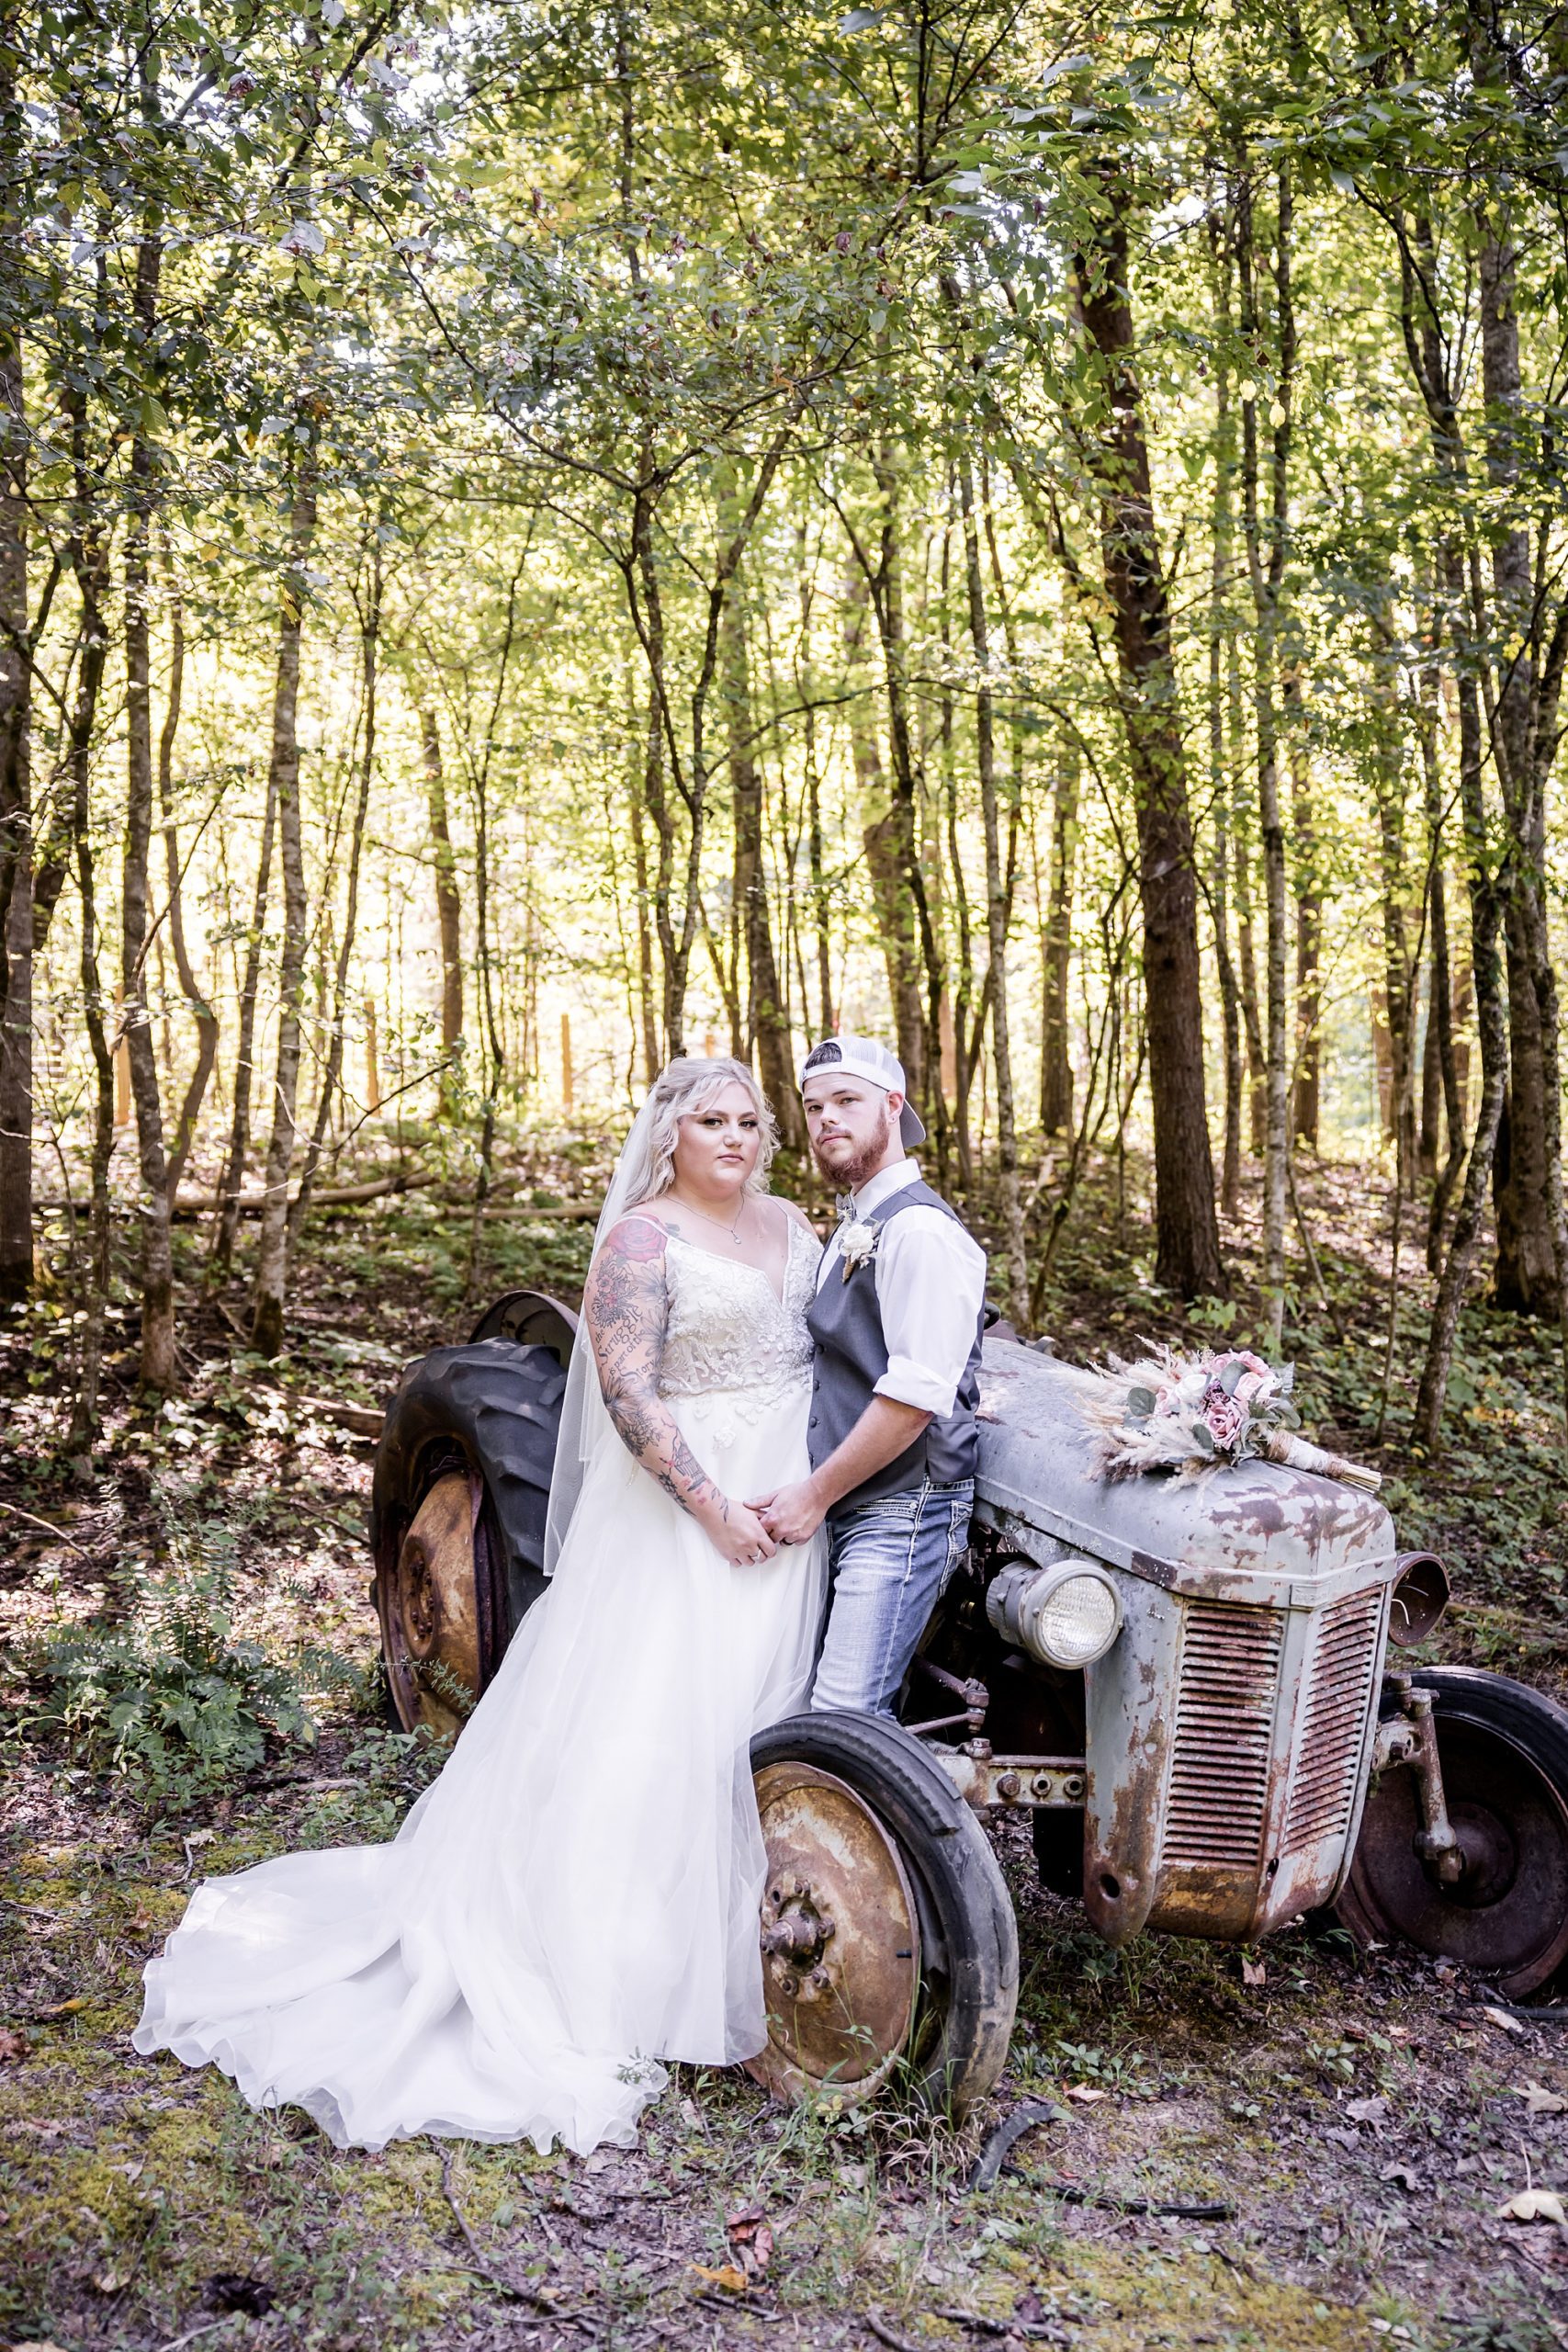 Summer Country Micro Wedding - Bride and Groom with rustic Tractor